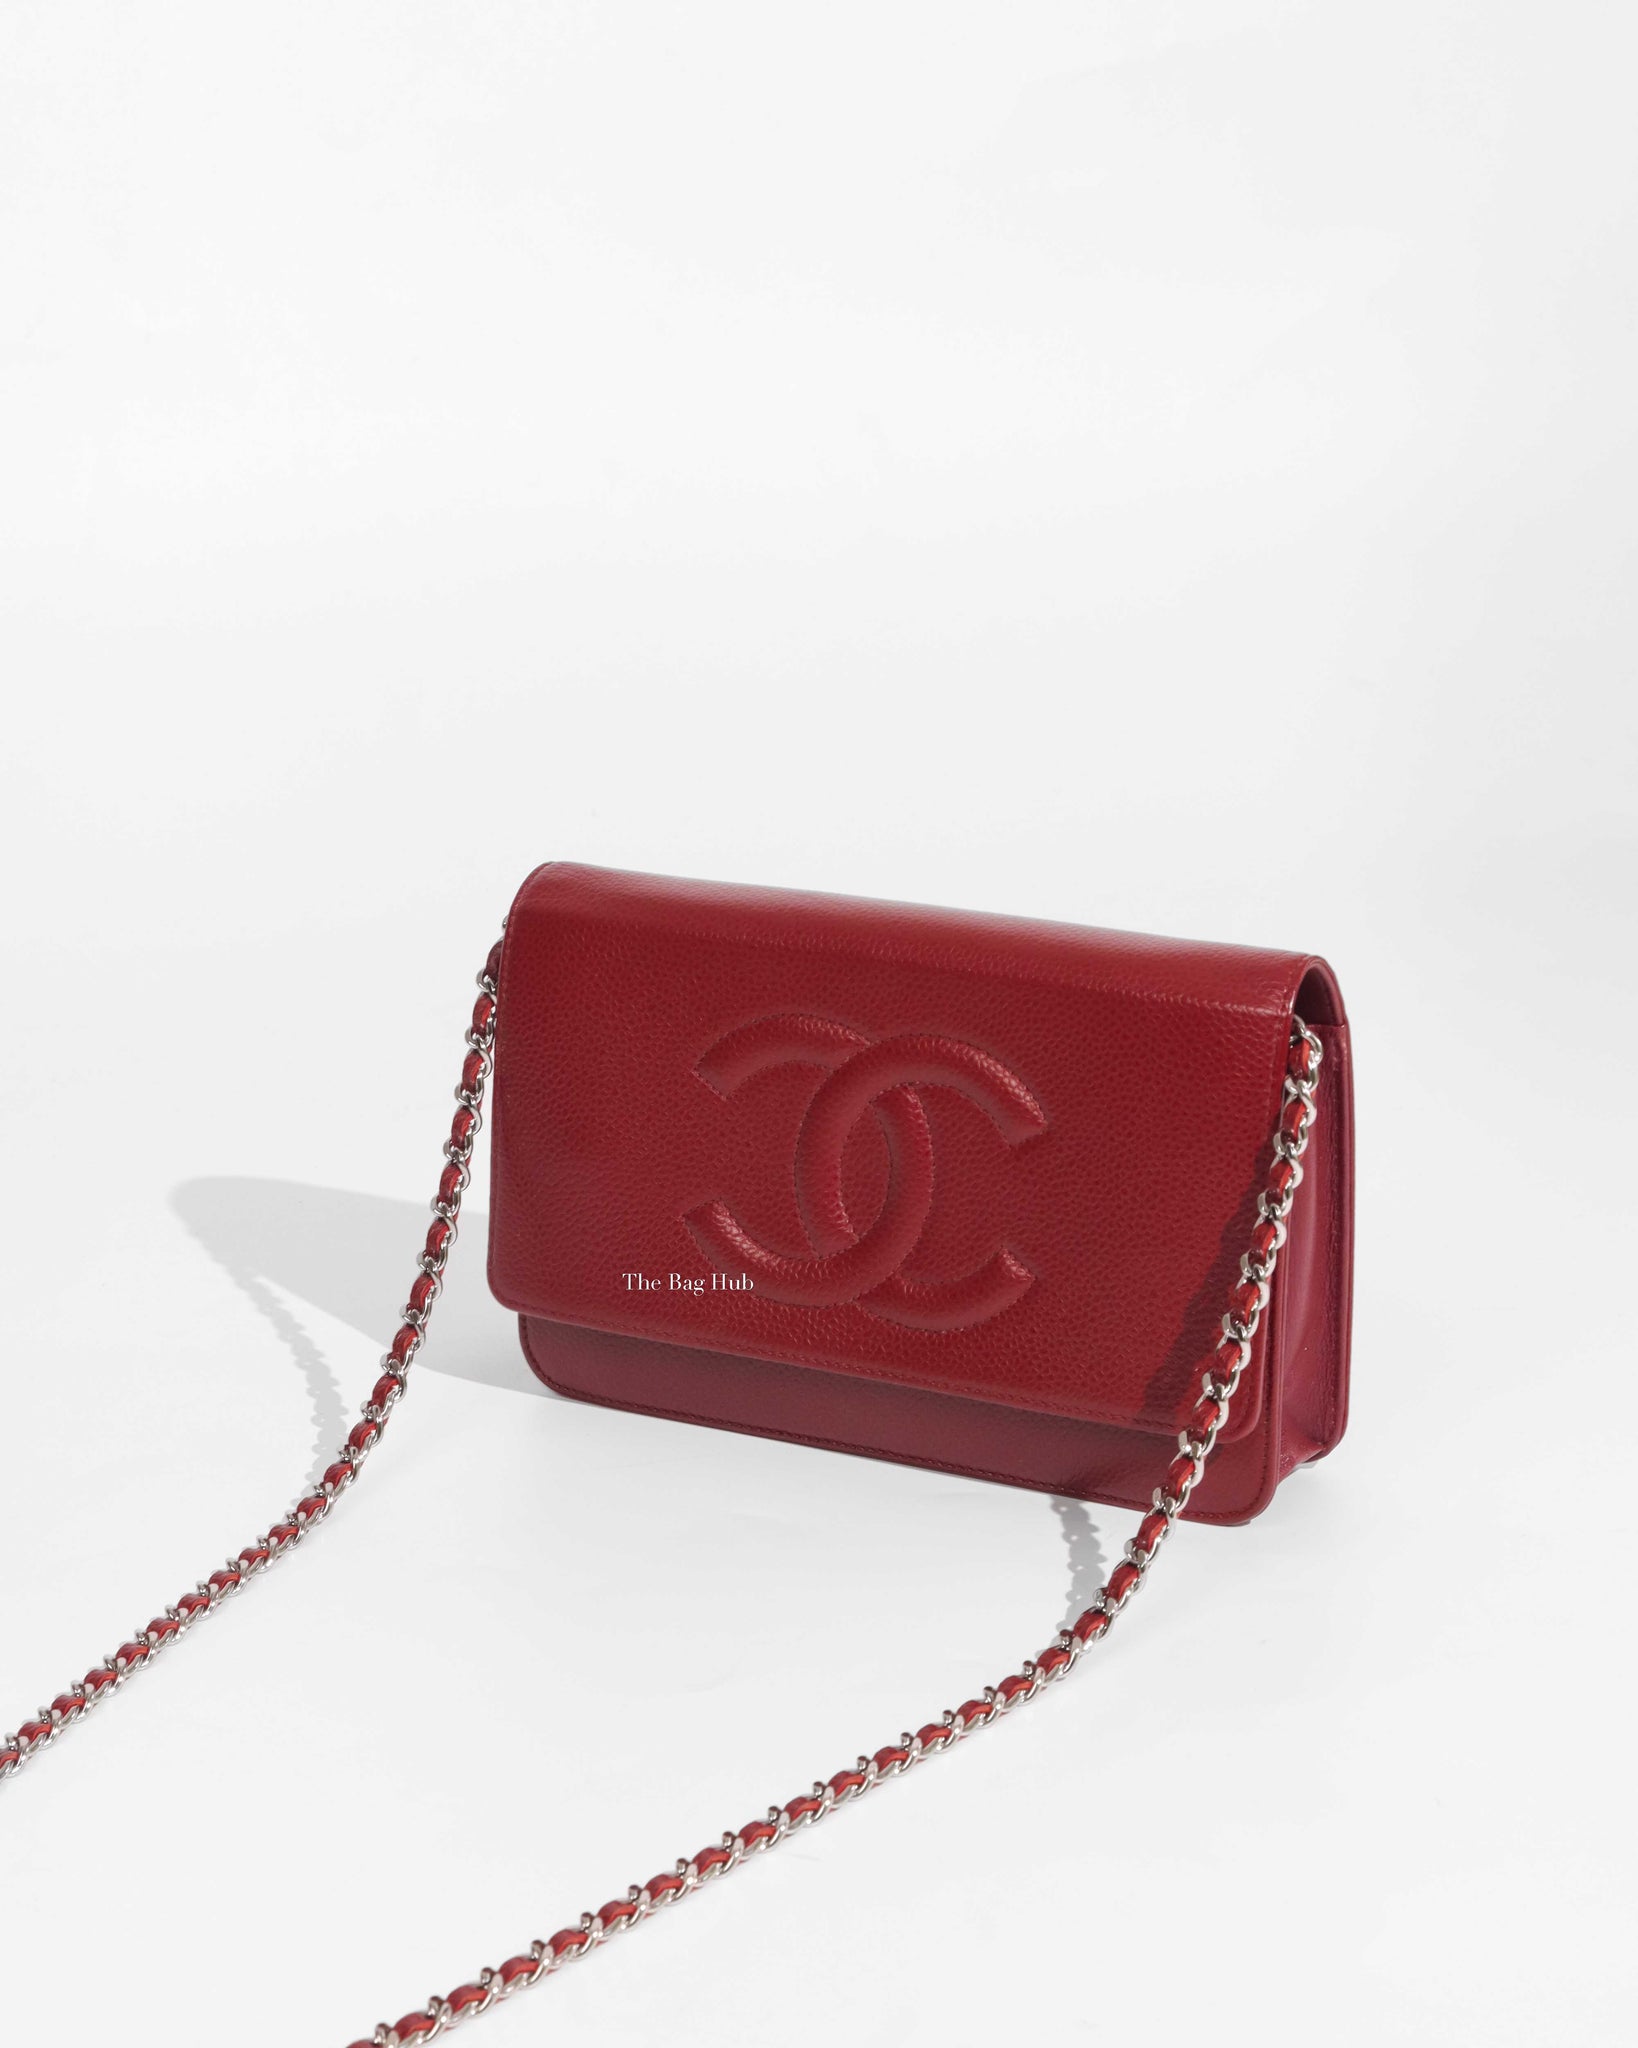 SOLD) Chanel Classic Wallet on Chain Red Caviar SHW Chanel Kuala Lumpur  (KL), Selangor, Malaysia. Supplier